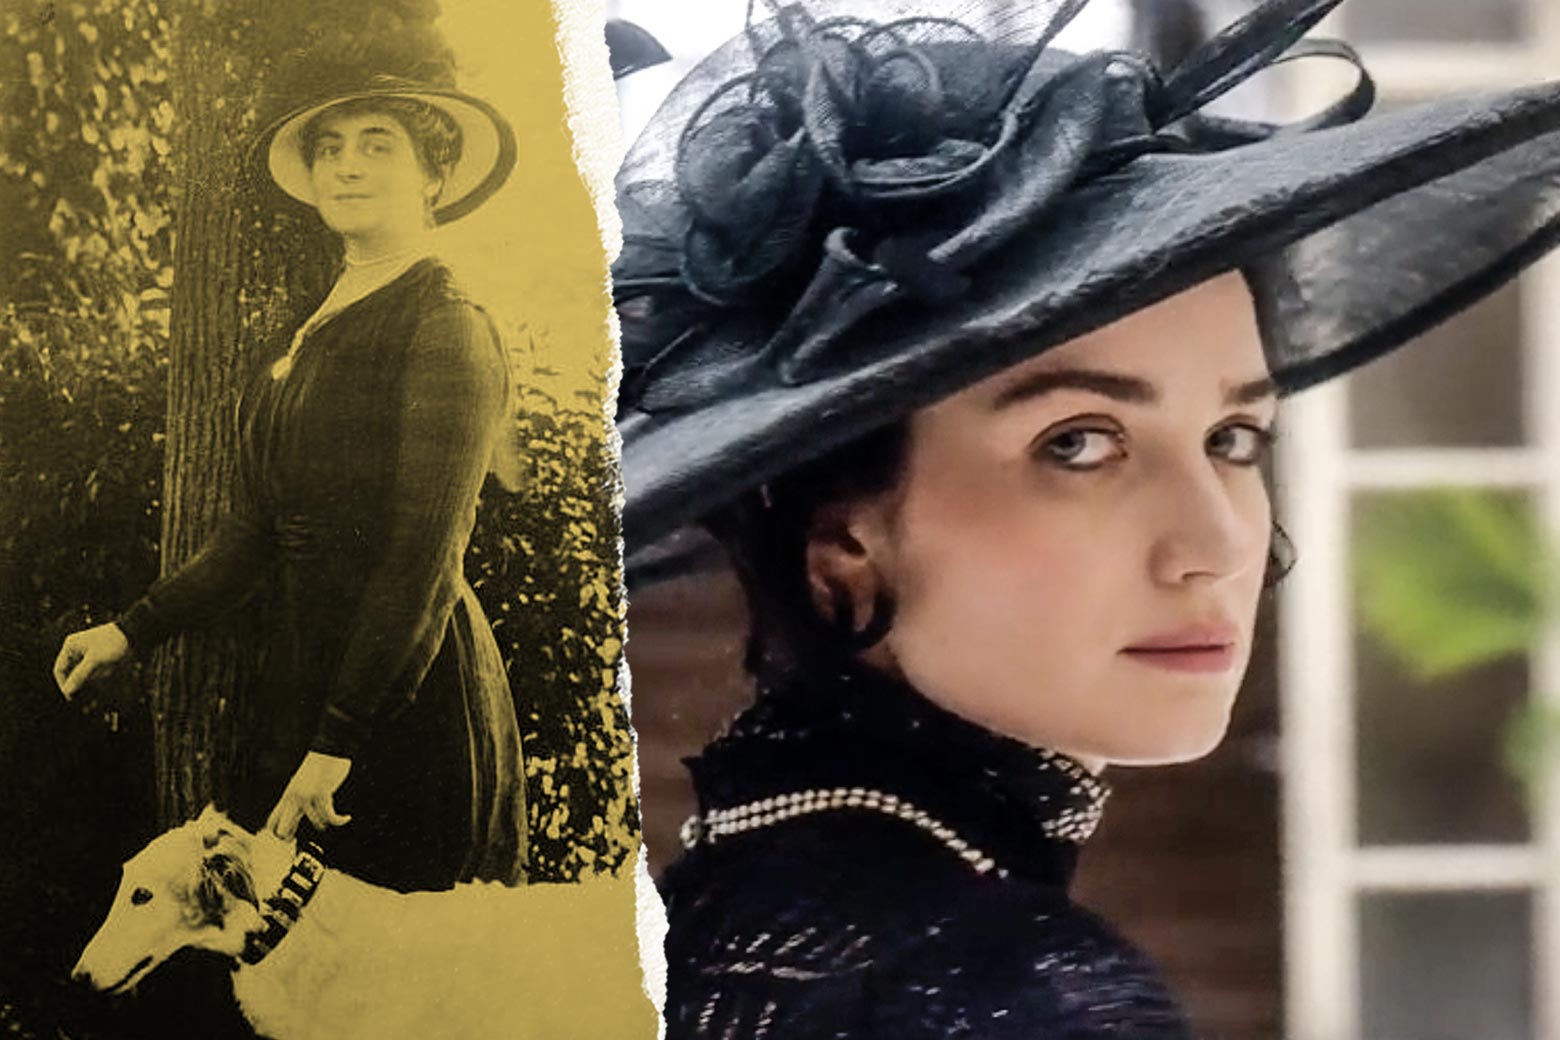 Anne Morgan and Eve Hewson, both with large hats. Morgan is holding a dog by the collar.